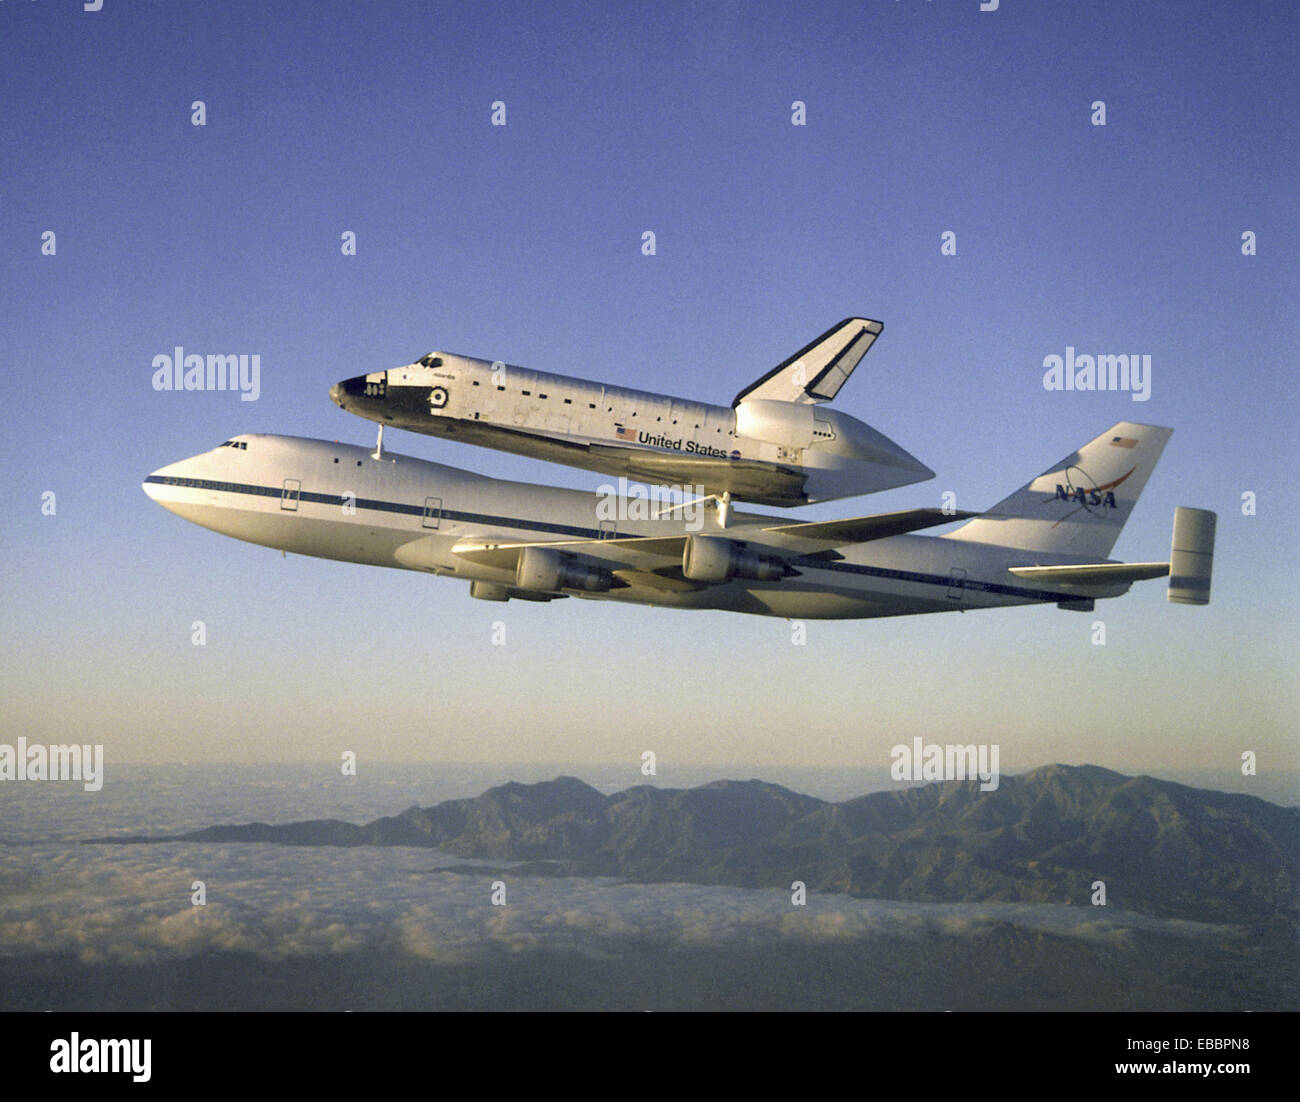 Shuttle Atlantis returning to Kennedy Space Center. The Space Shuttle Atlantis atop the Shuttle Carrier Aircraft (SCA) returns Stock Photo